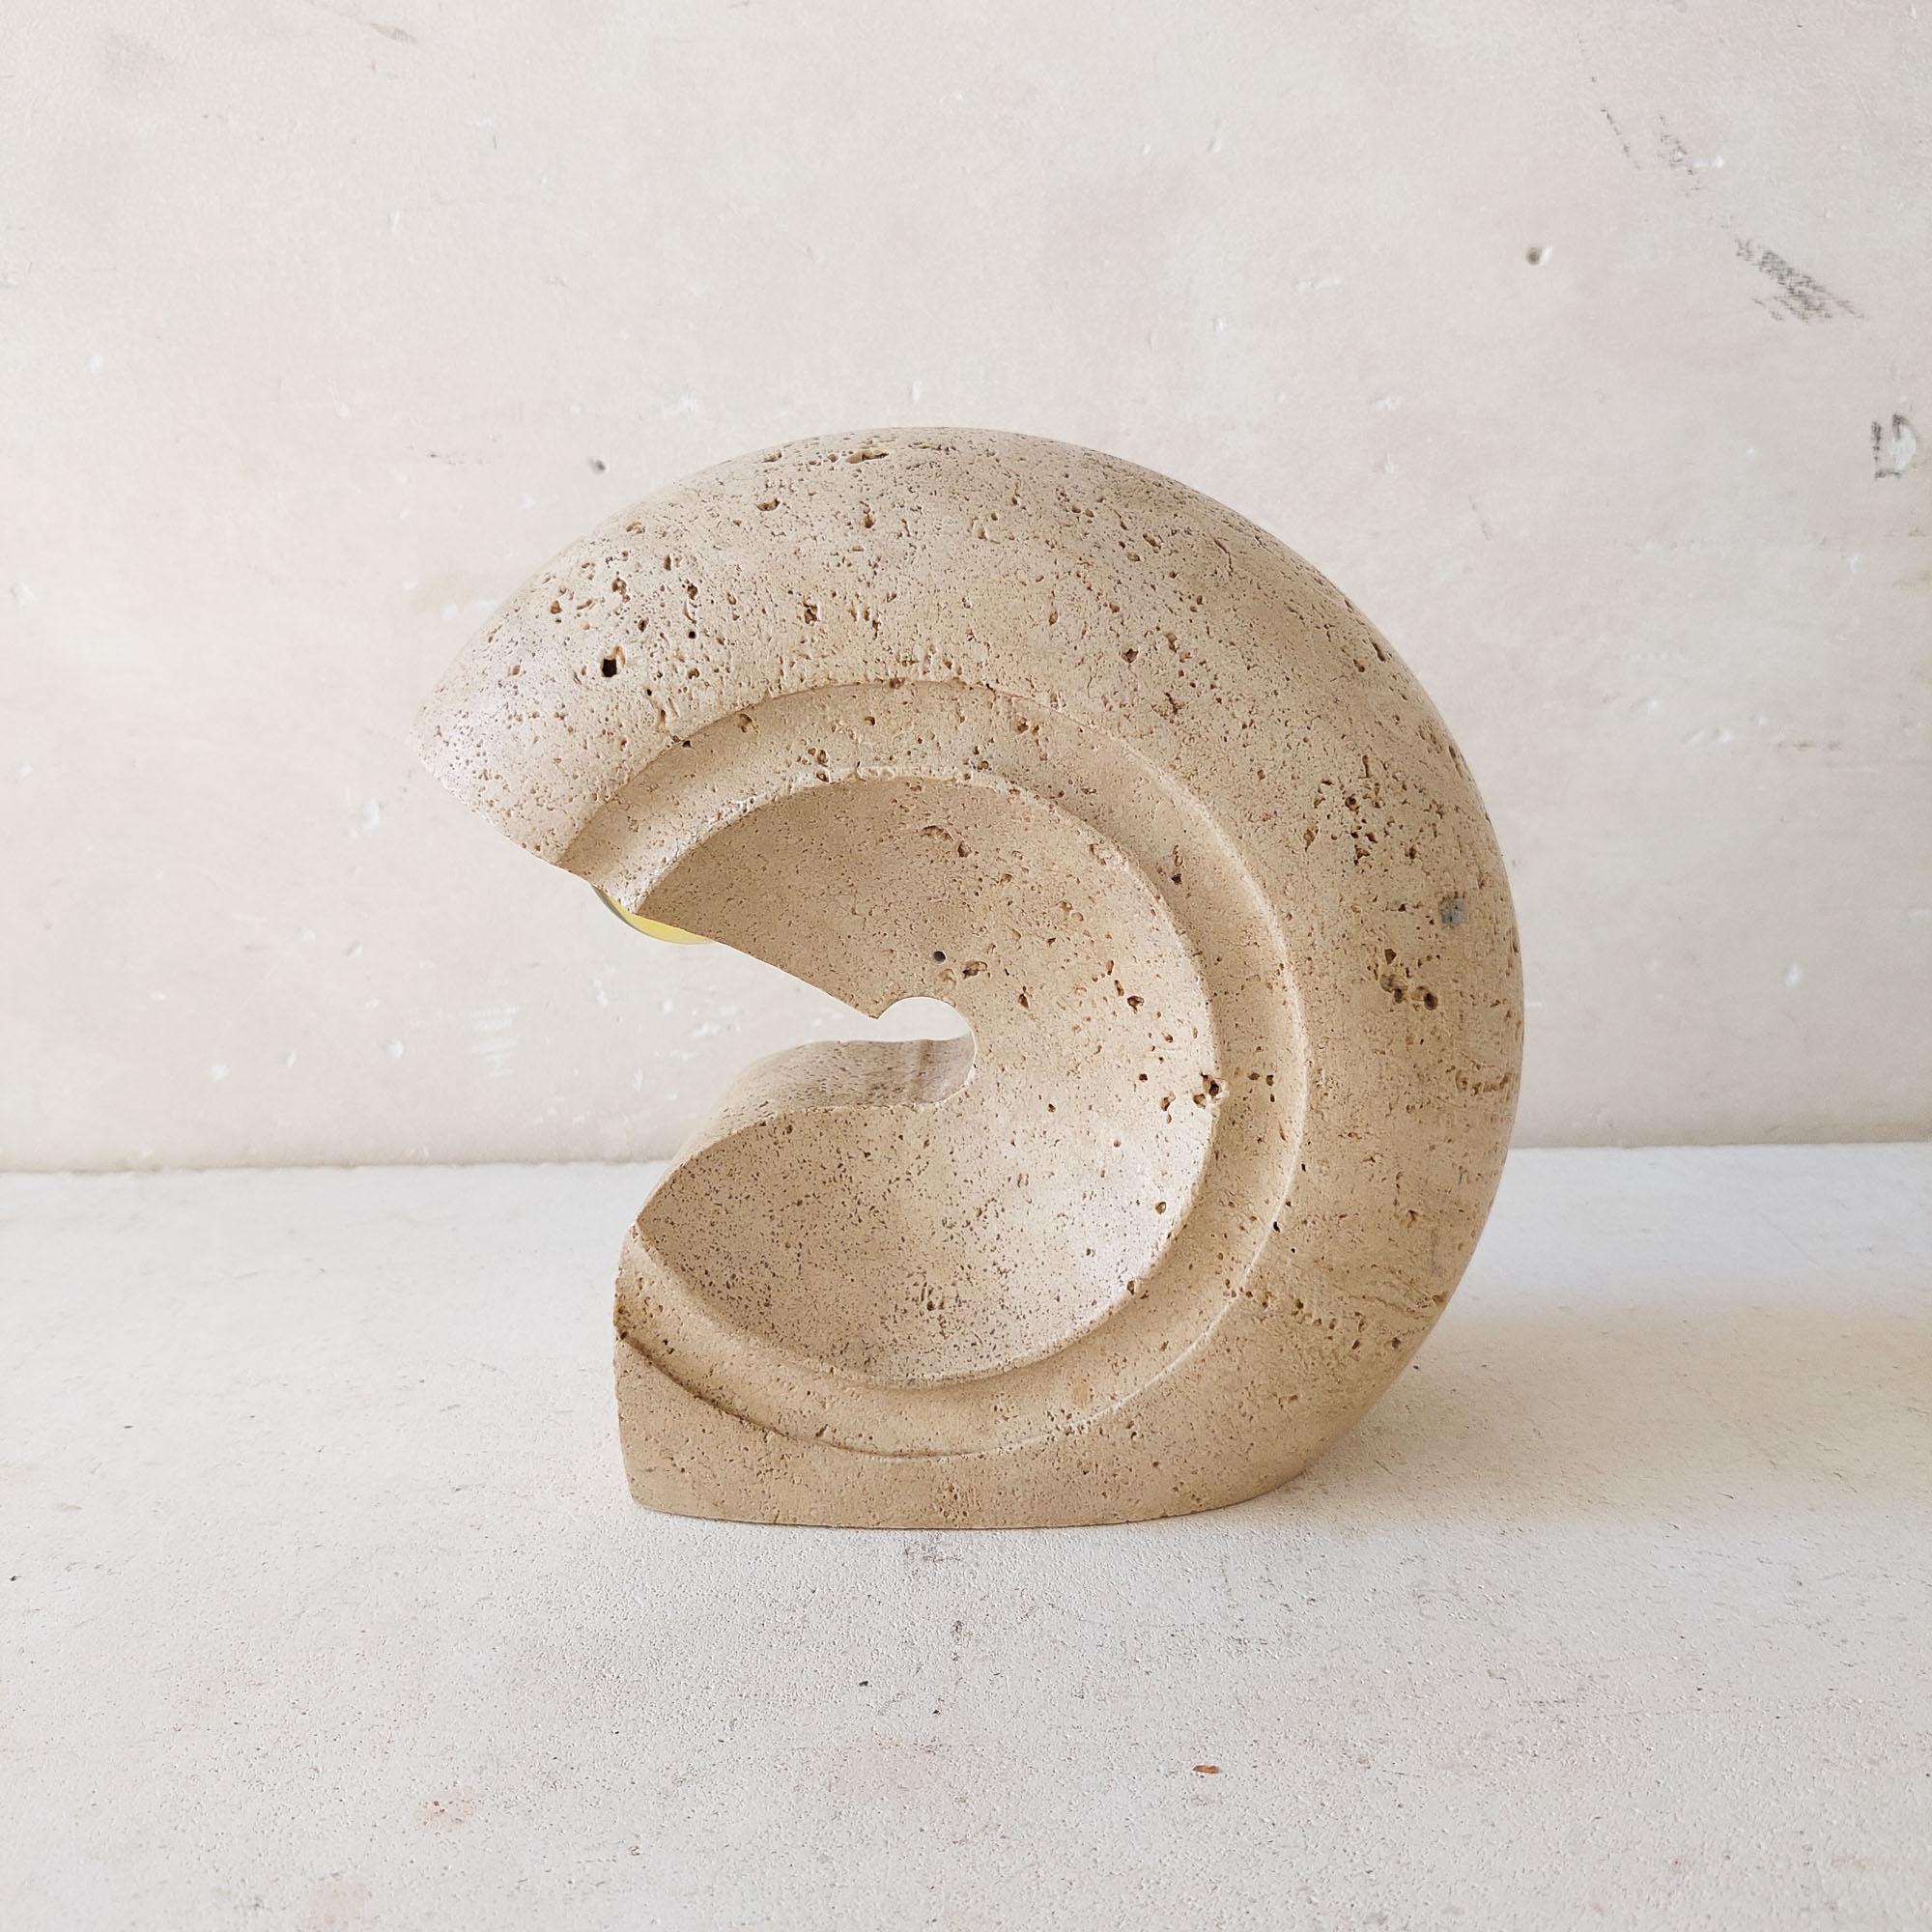 Beautiful organic travertine table lamp, designed by designer Giuliano Cesari, manufactured by Nucleo Sormani, Italy, circa 1970. A special vintage piece with a beautiful round shape that is cut from one piece of unfilled travertine. The travertine